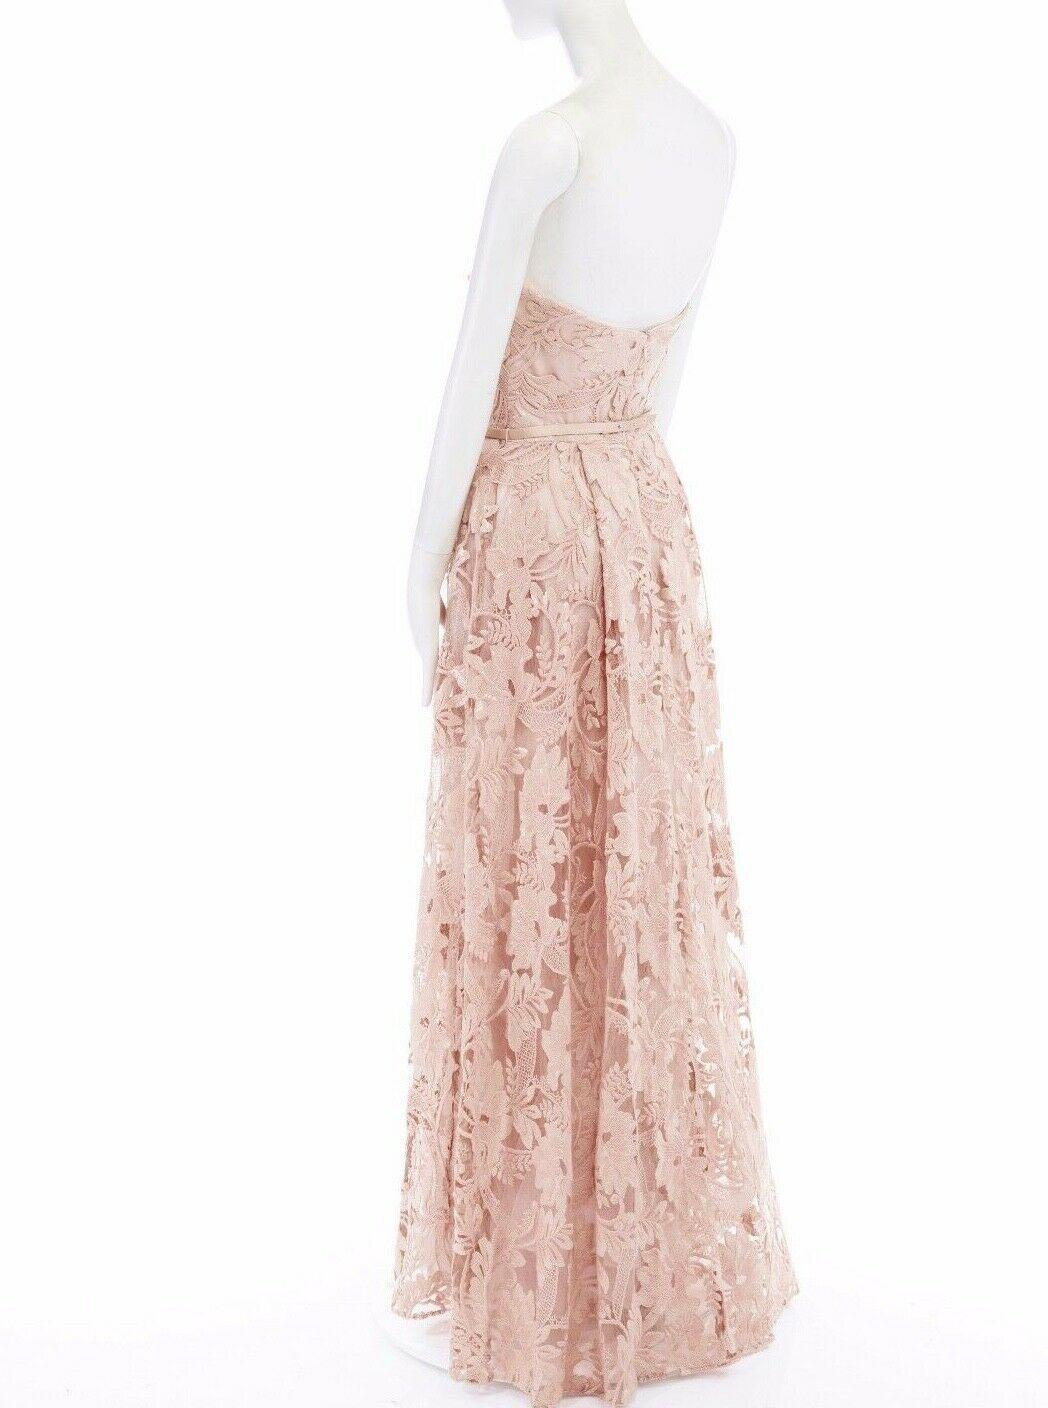 Women's new MARCHESA NOTTE nude pink sequins embroidery lace belted gown dress US6 M